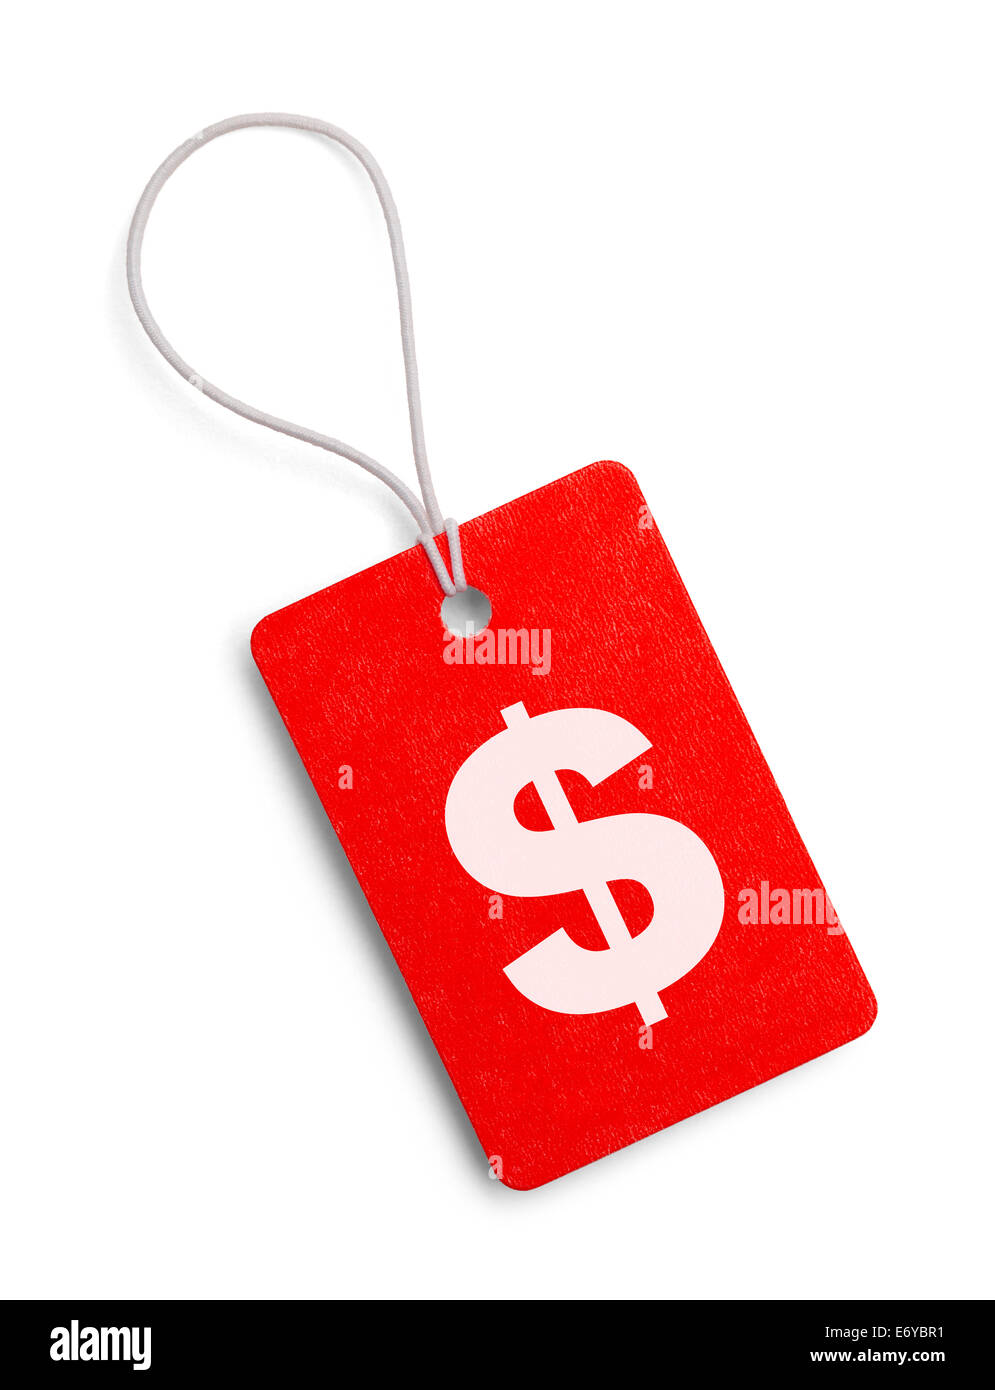 Small Red Money Hang Tag Isolated on White Background. Stock Photo